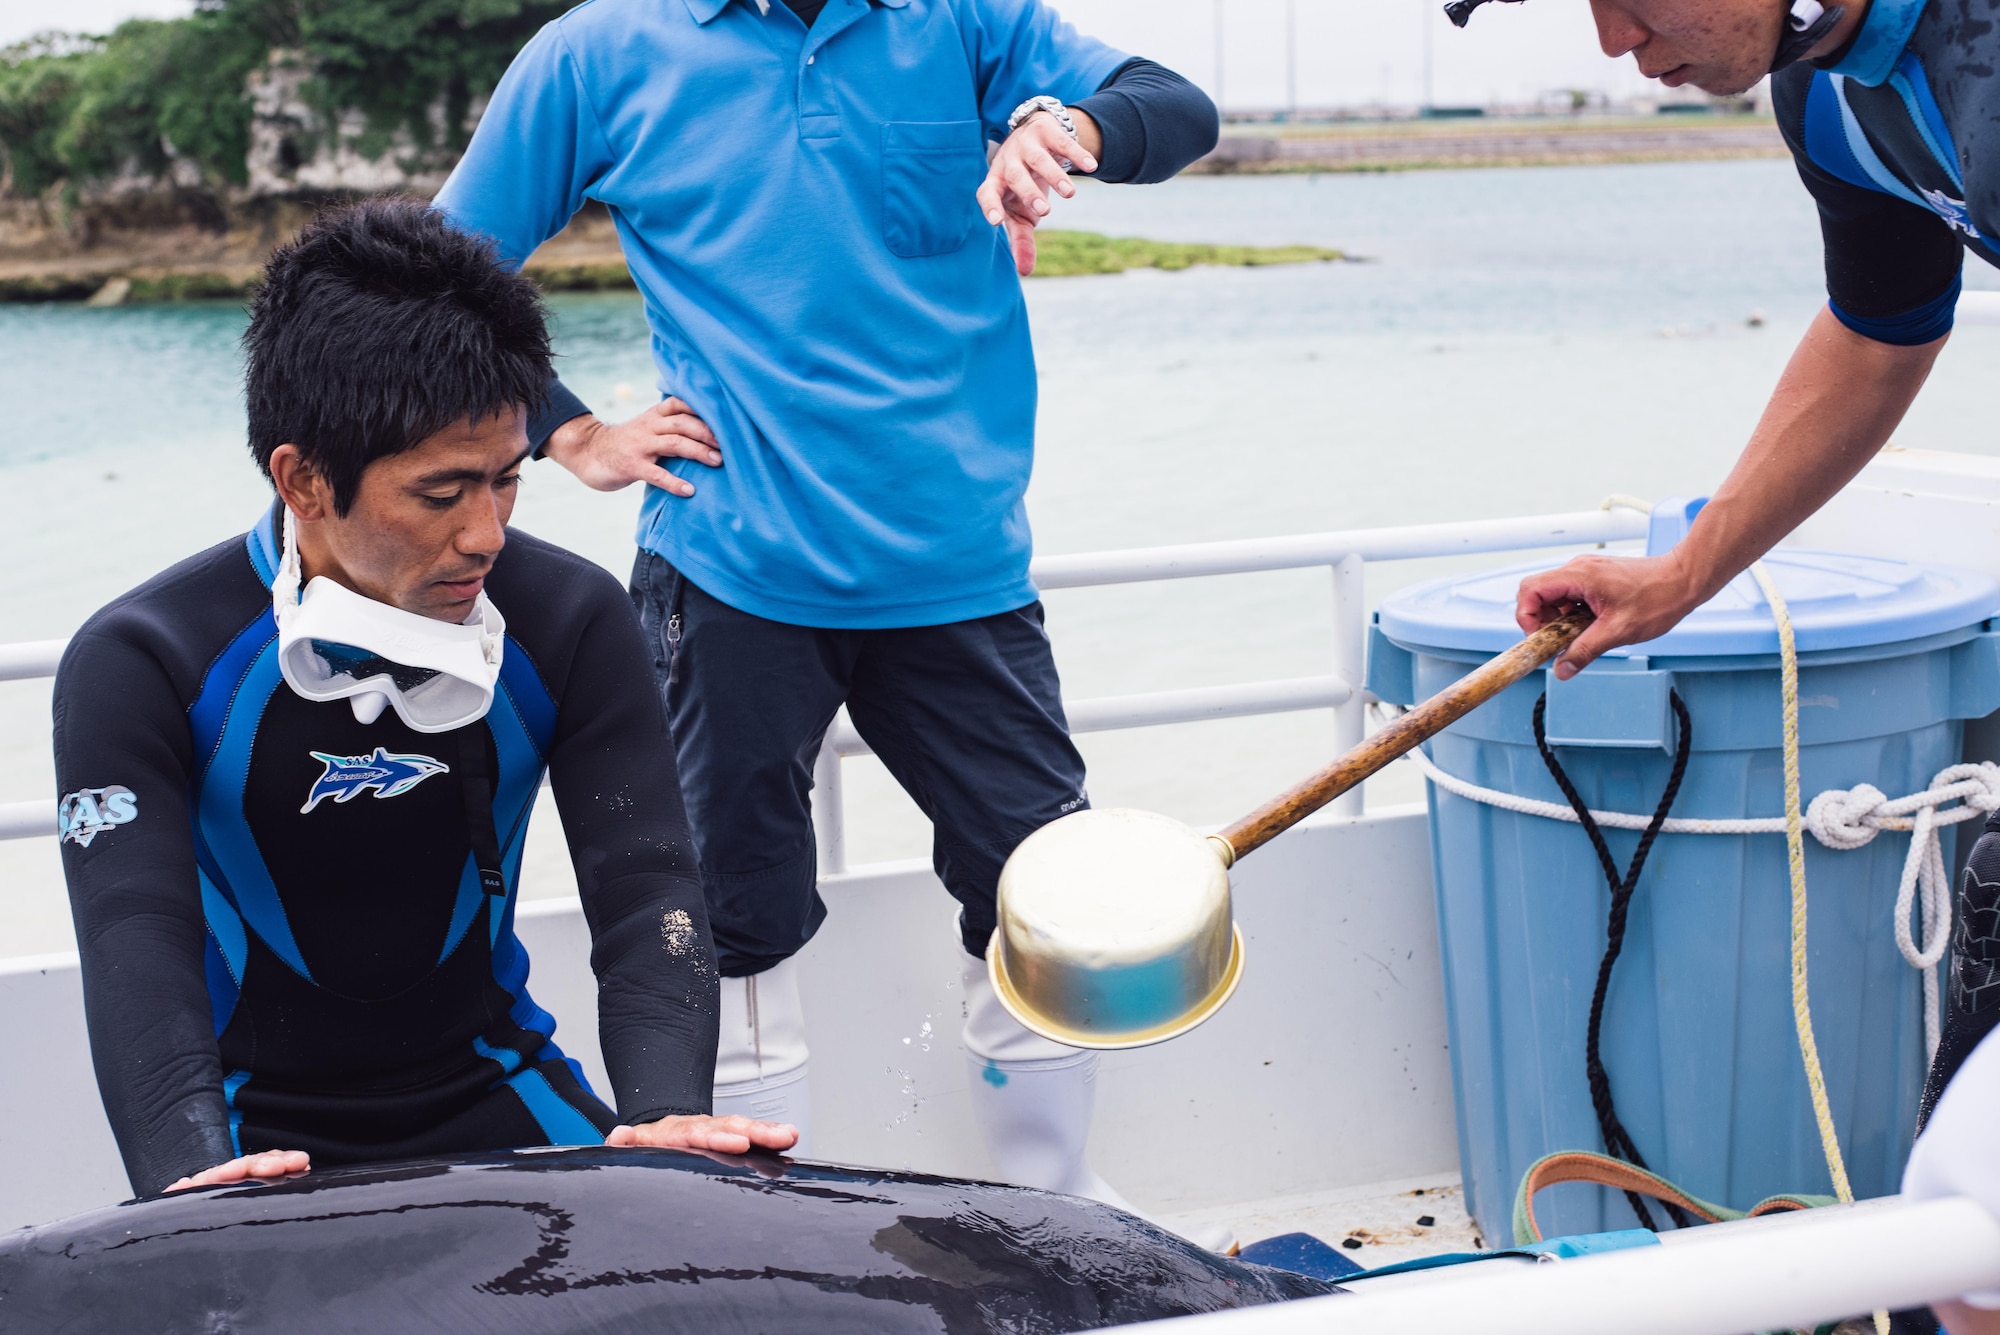 A veterinarian team from the Okinawa Charumi Aquarium pours water on an injured dwarf sperm whale April 17, 2017, at Kadena Marina, Japan. The team waited for the whale to stabilize before beginning the hour-long journey to the aquarium where the whale is currently under medical care. (U.S. Air Force photo by Senior Airman Omari Bernard/Released)